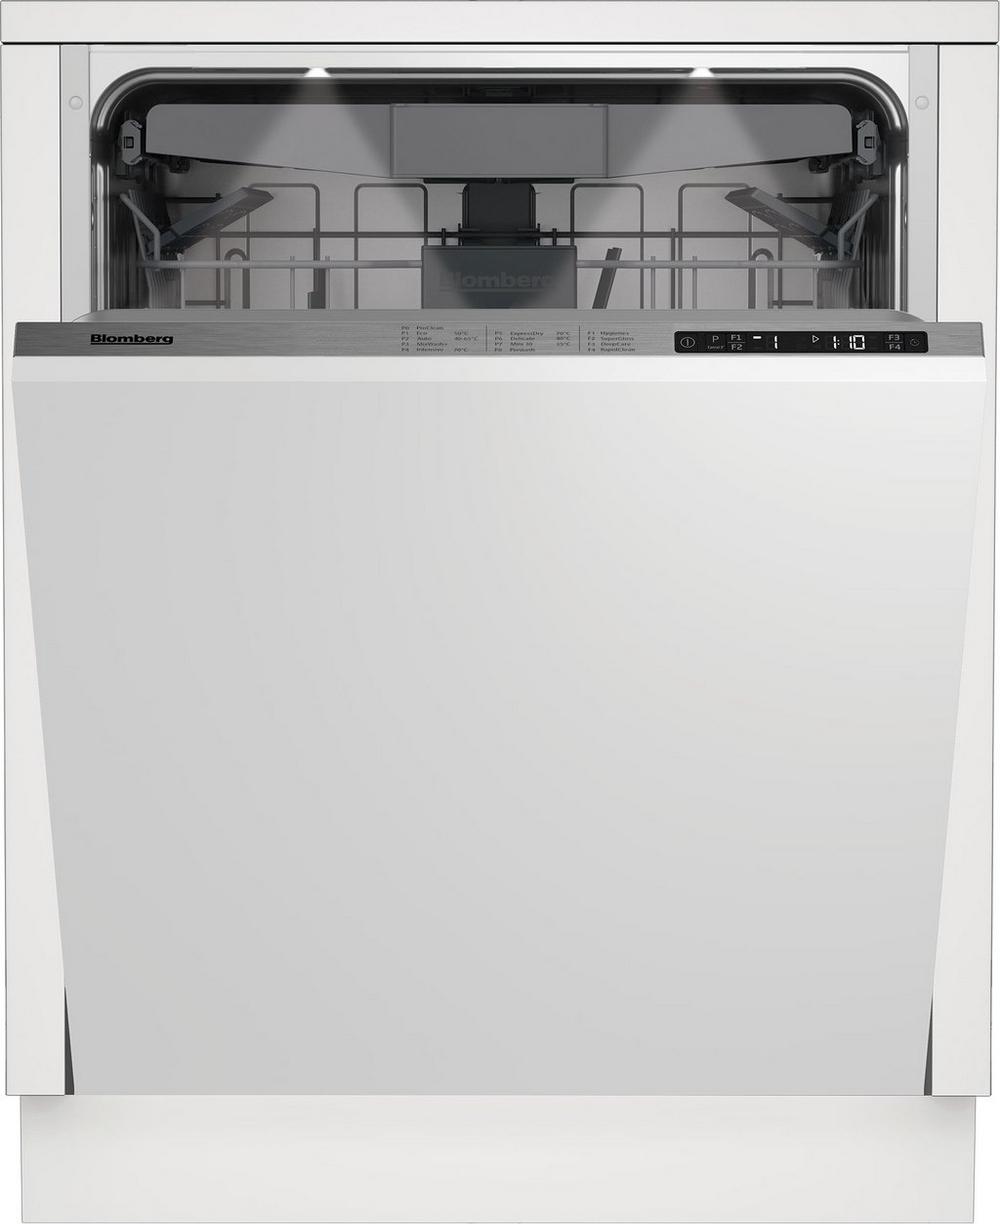 Blomberg Ldv63440 Full Size Integrated Dishwasher 16 Place Settings Euronics 1 Only At This Price